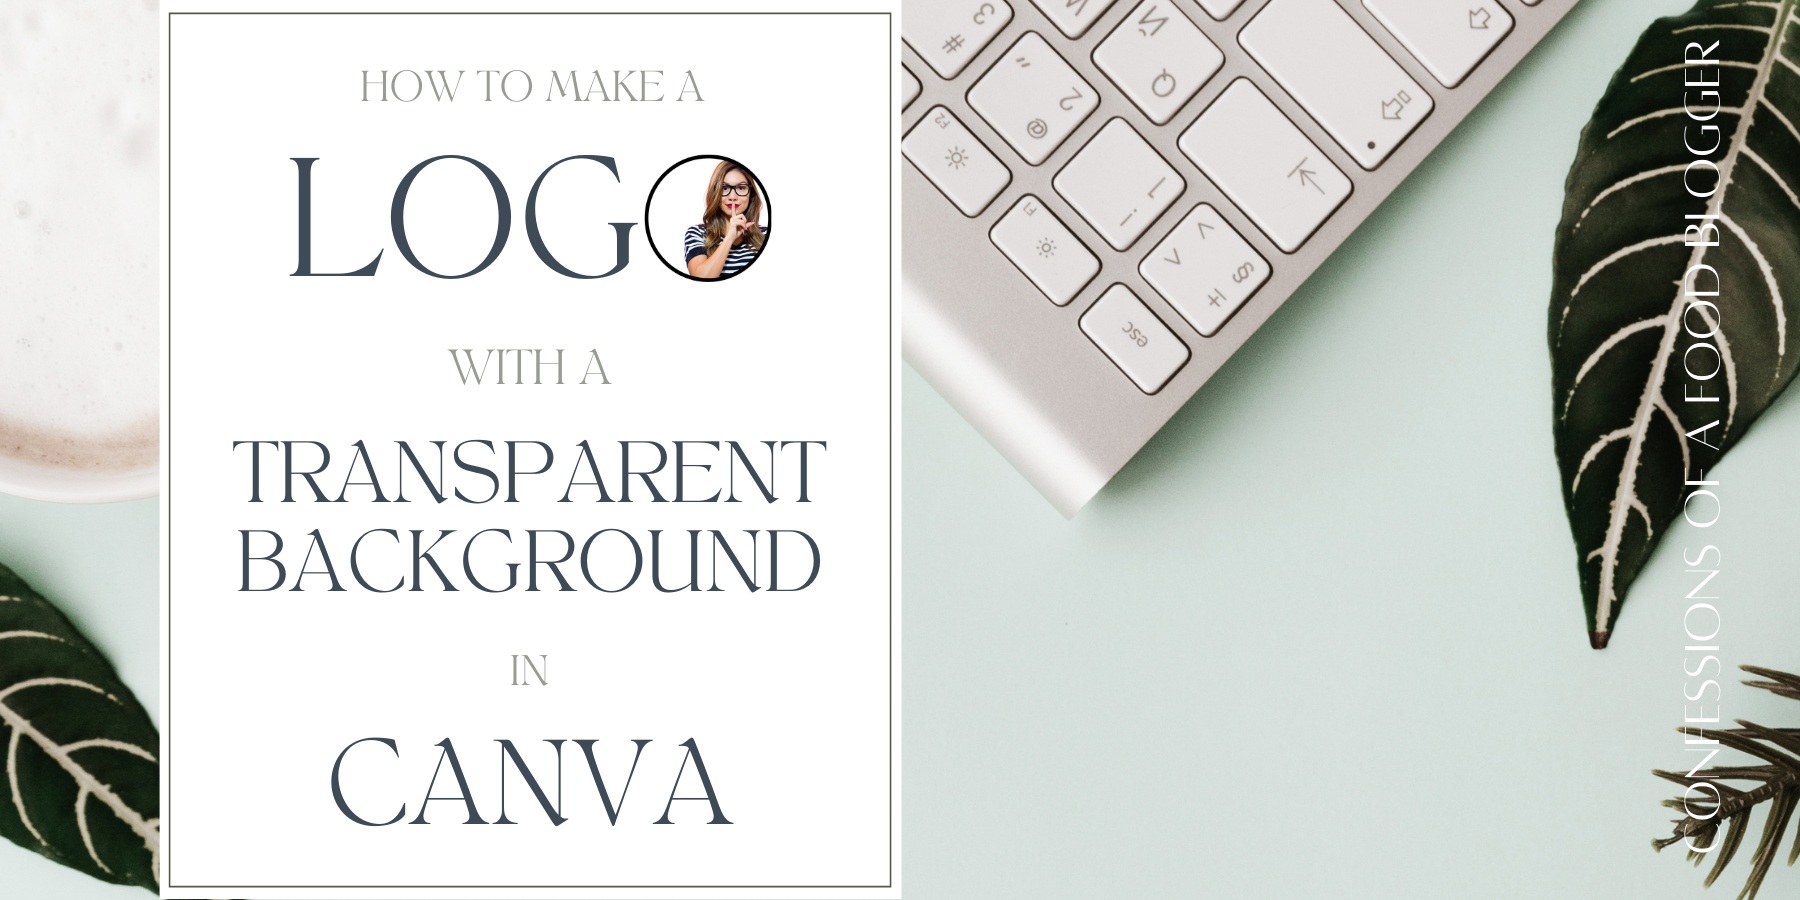 How to Make Logo with a Transparent Background in Canva